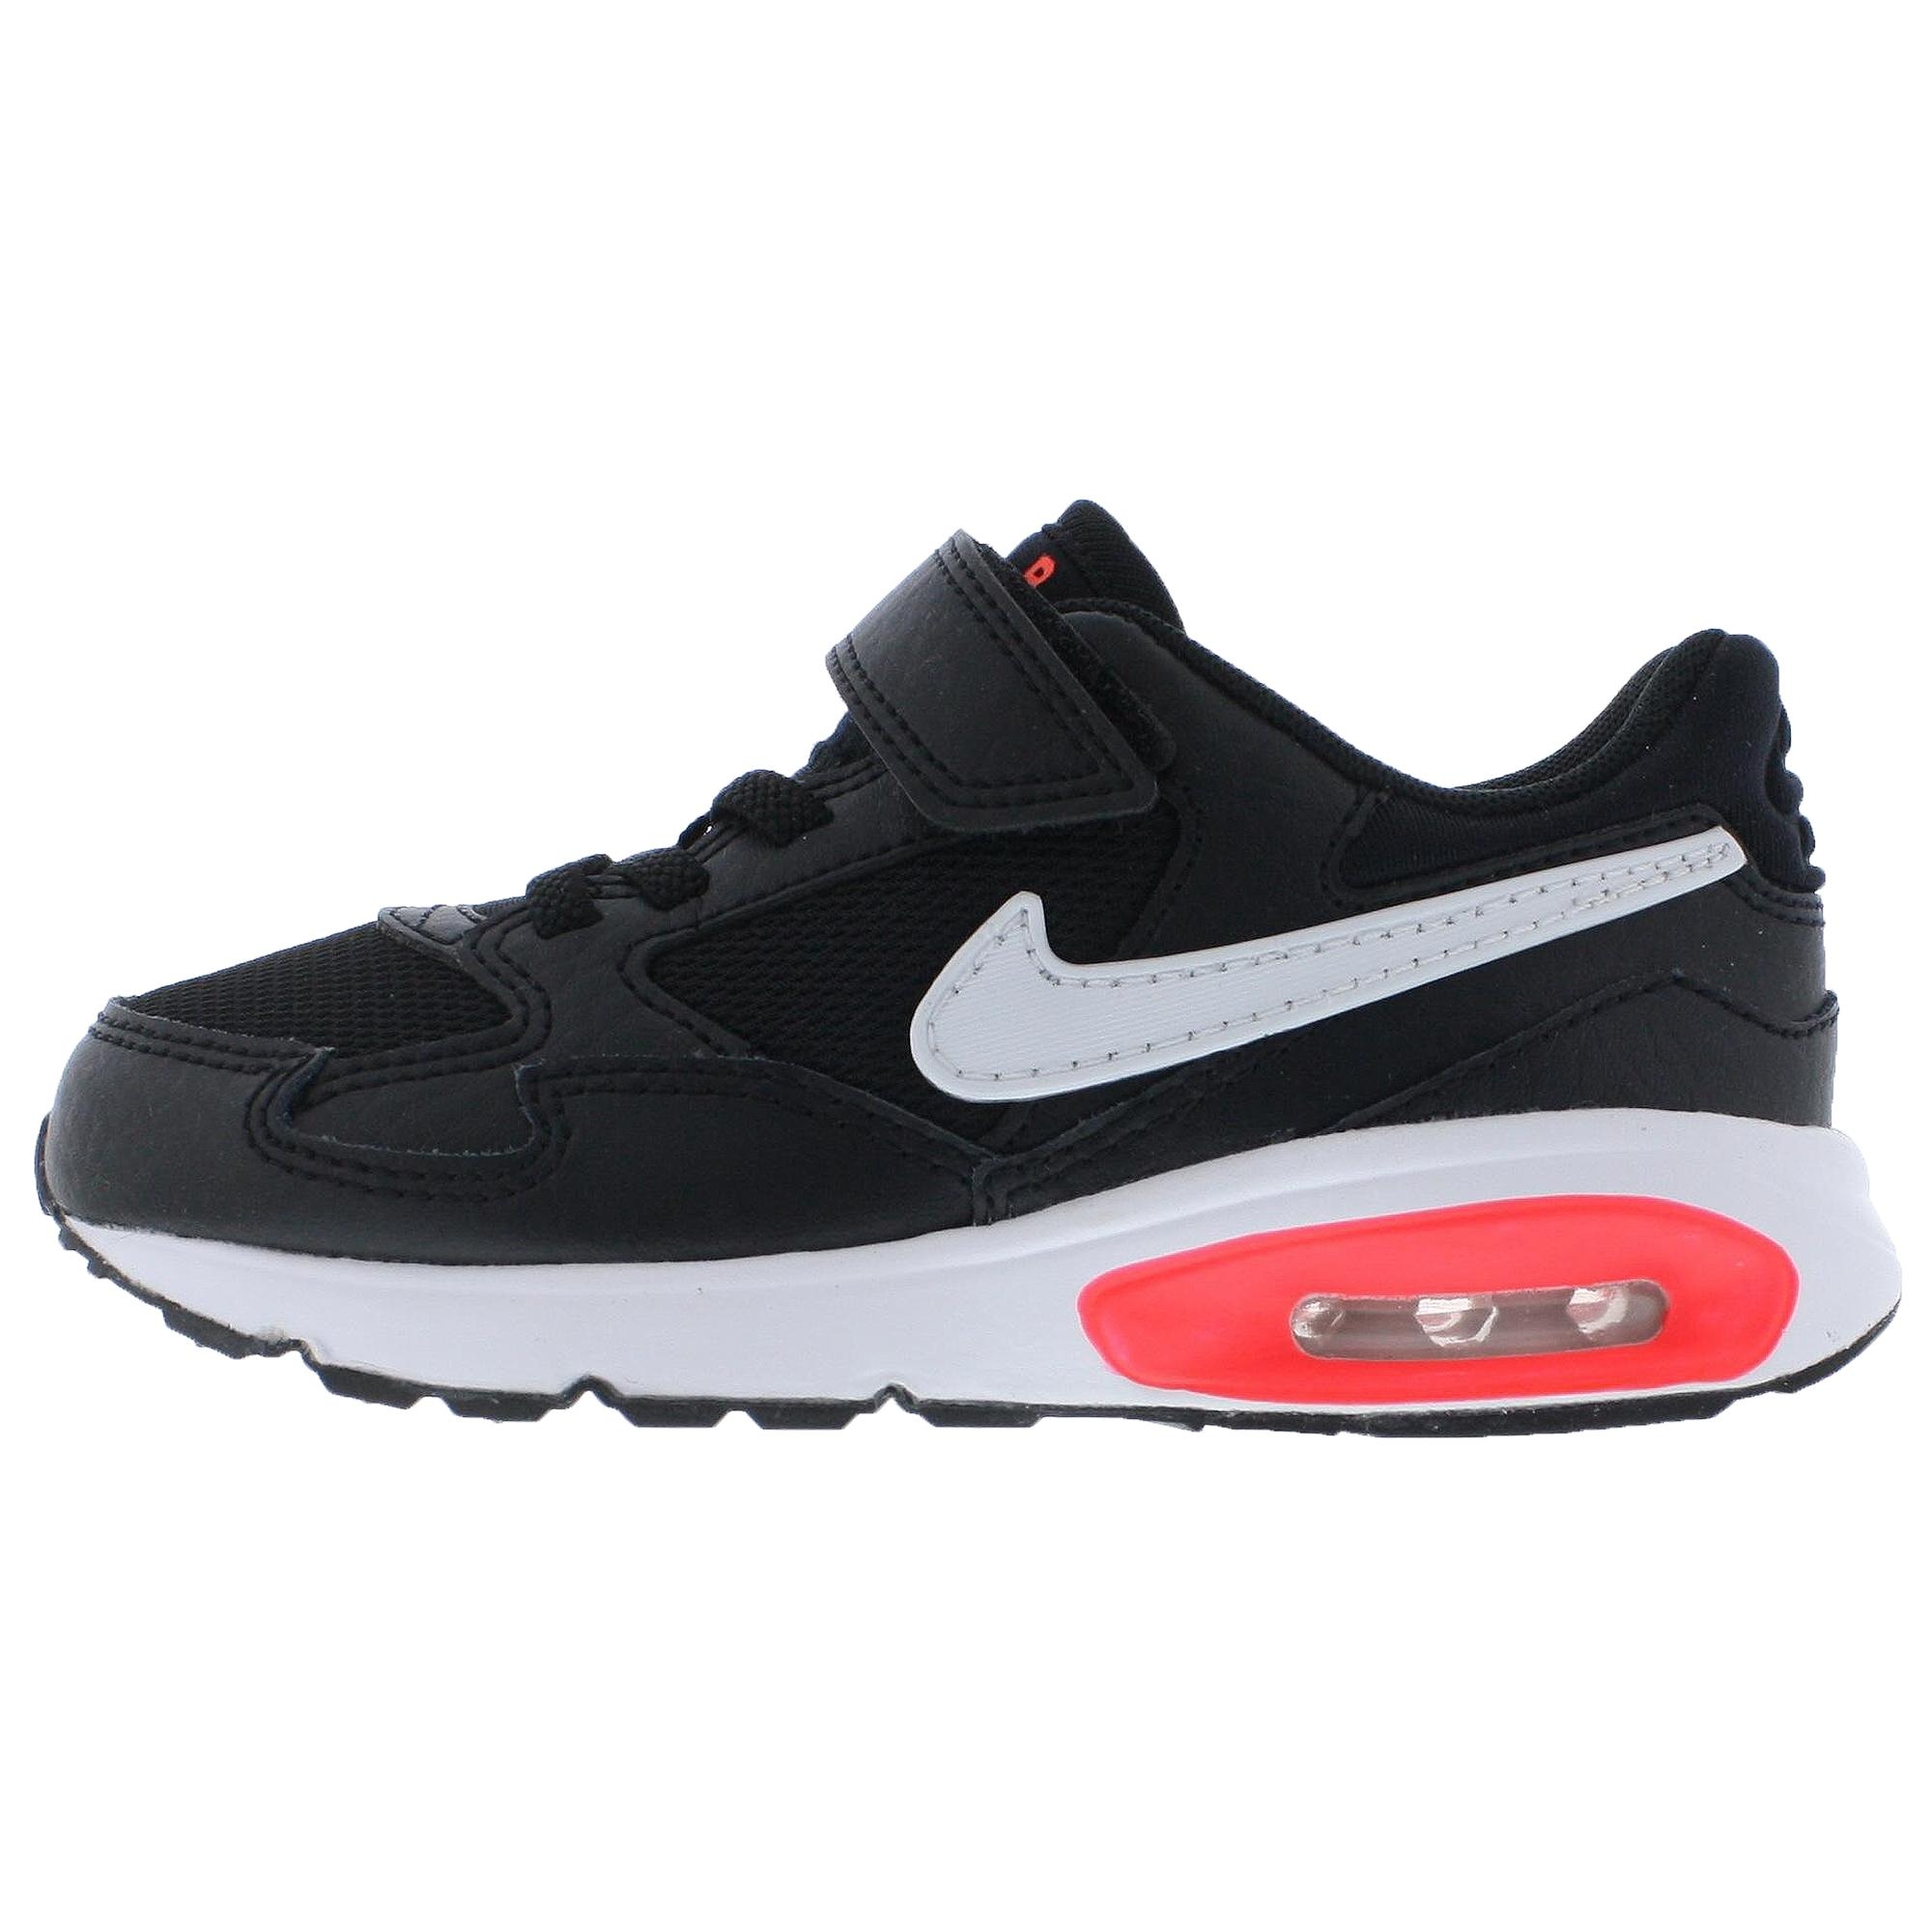 Nike Air Max ST (PSV) - Sale Kids Winter Shoes & Boots - Bobux, Pretty Brave, McKinlays, Skechers and more| Future Feet - Nike